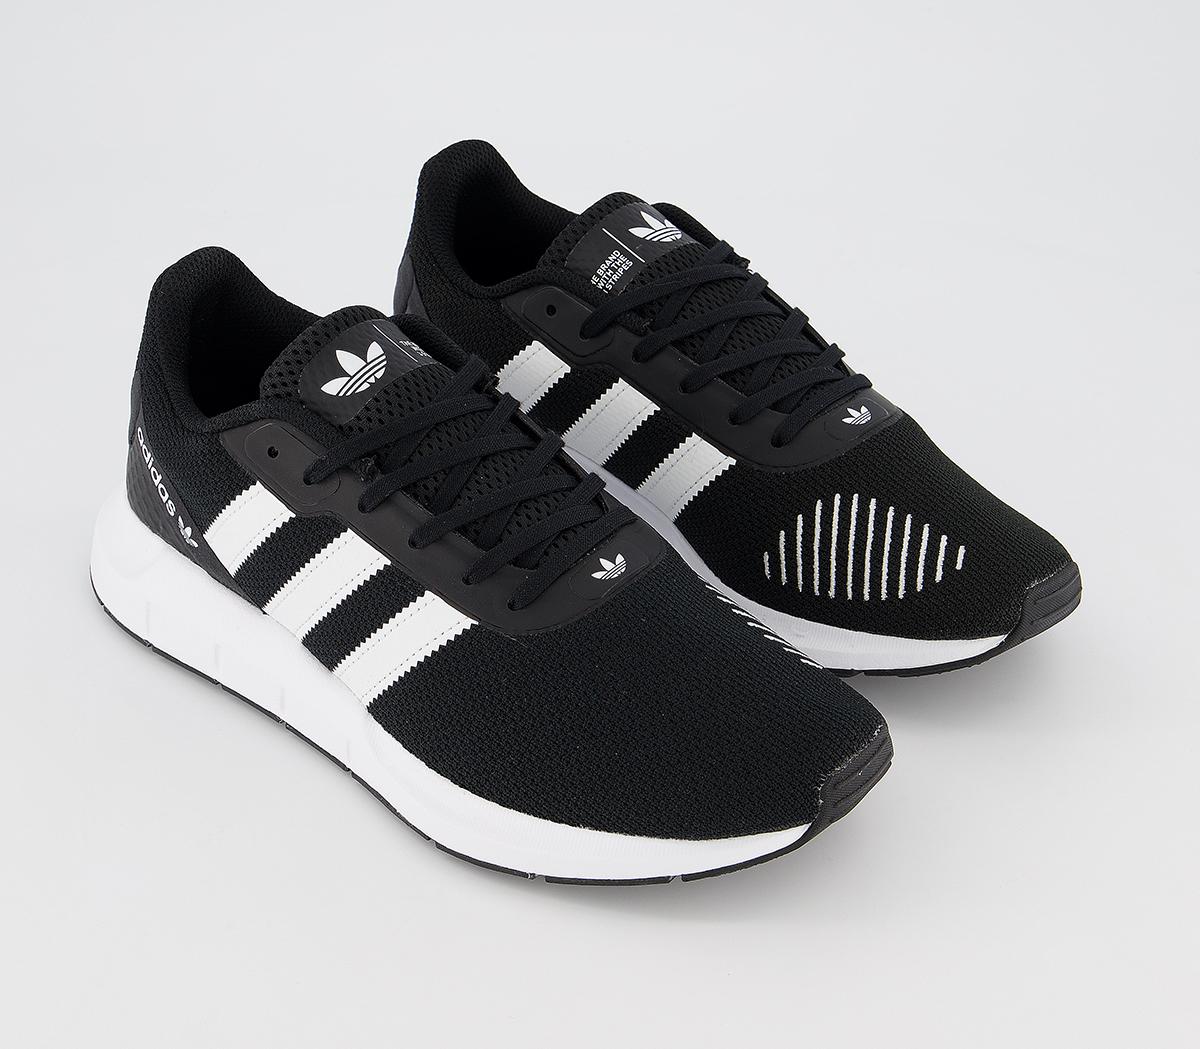 adidas Swift Run Trainers Core Black Cloud White - His trainers